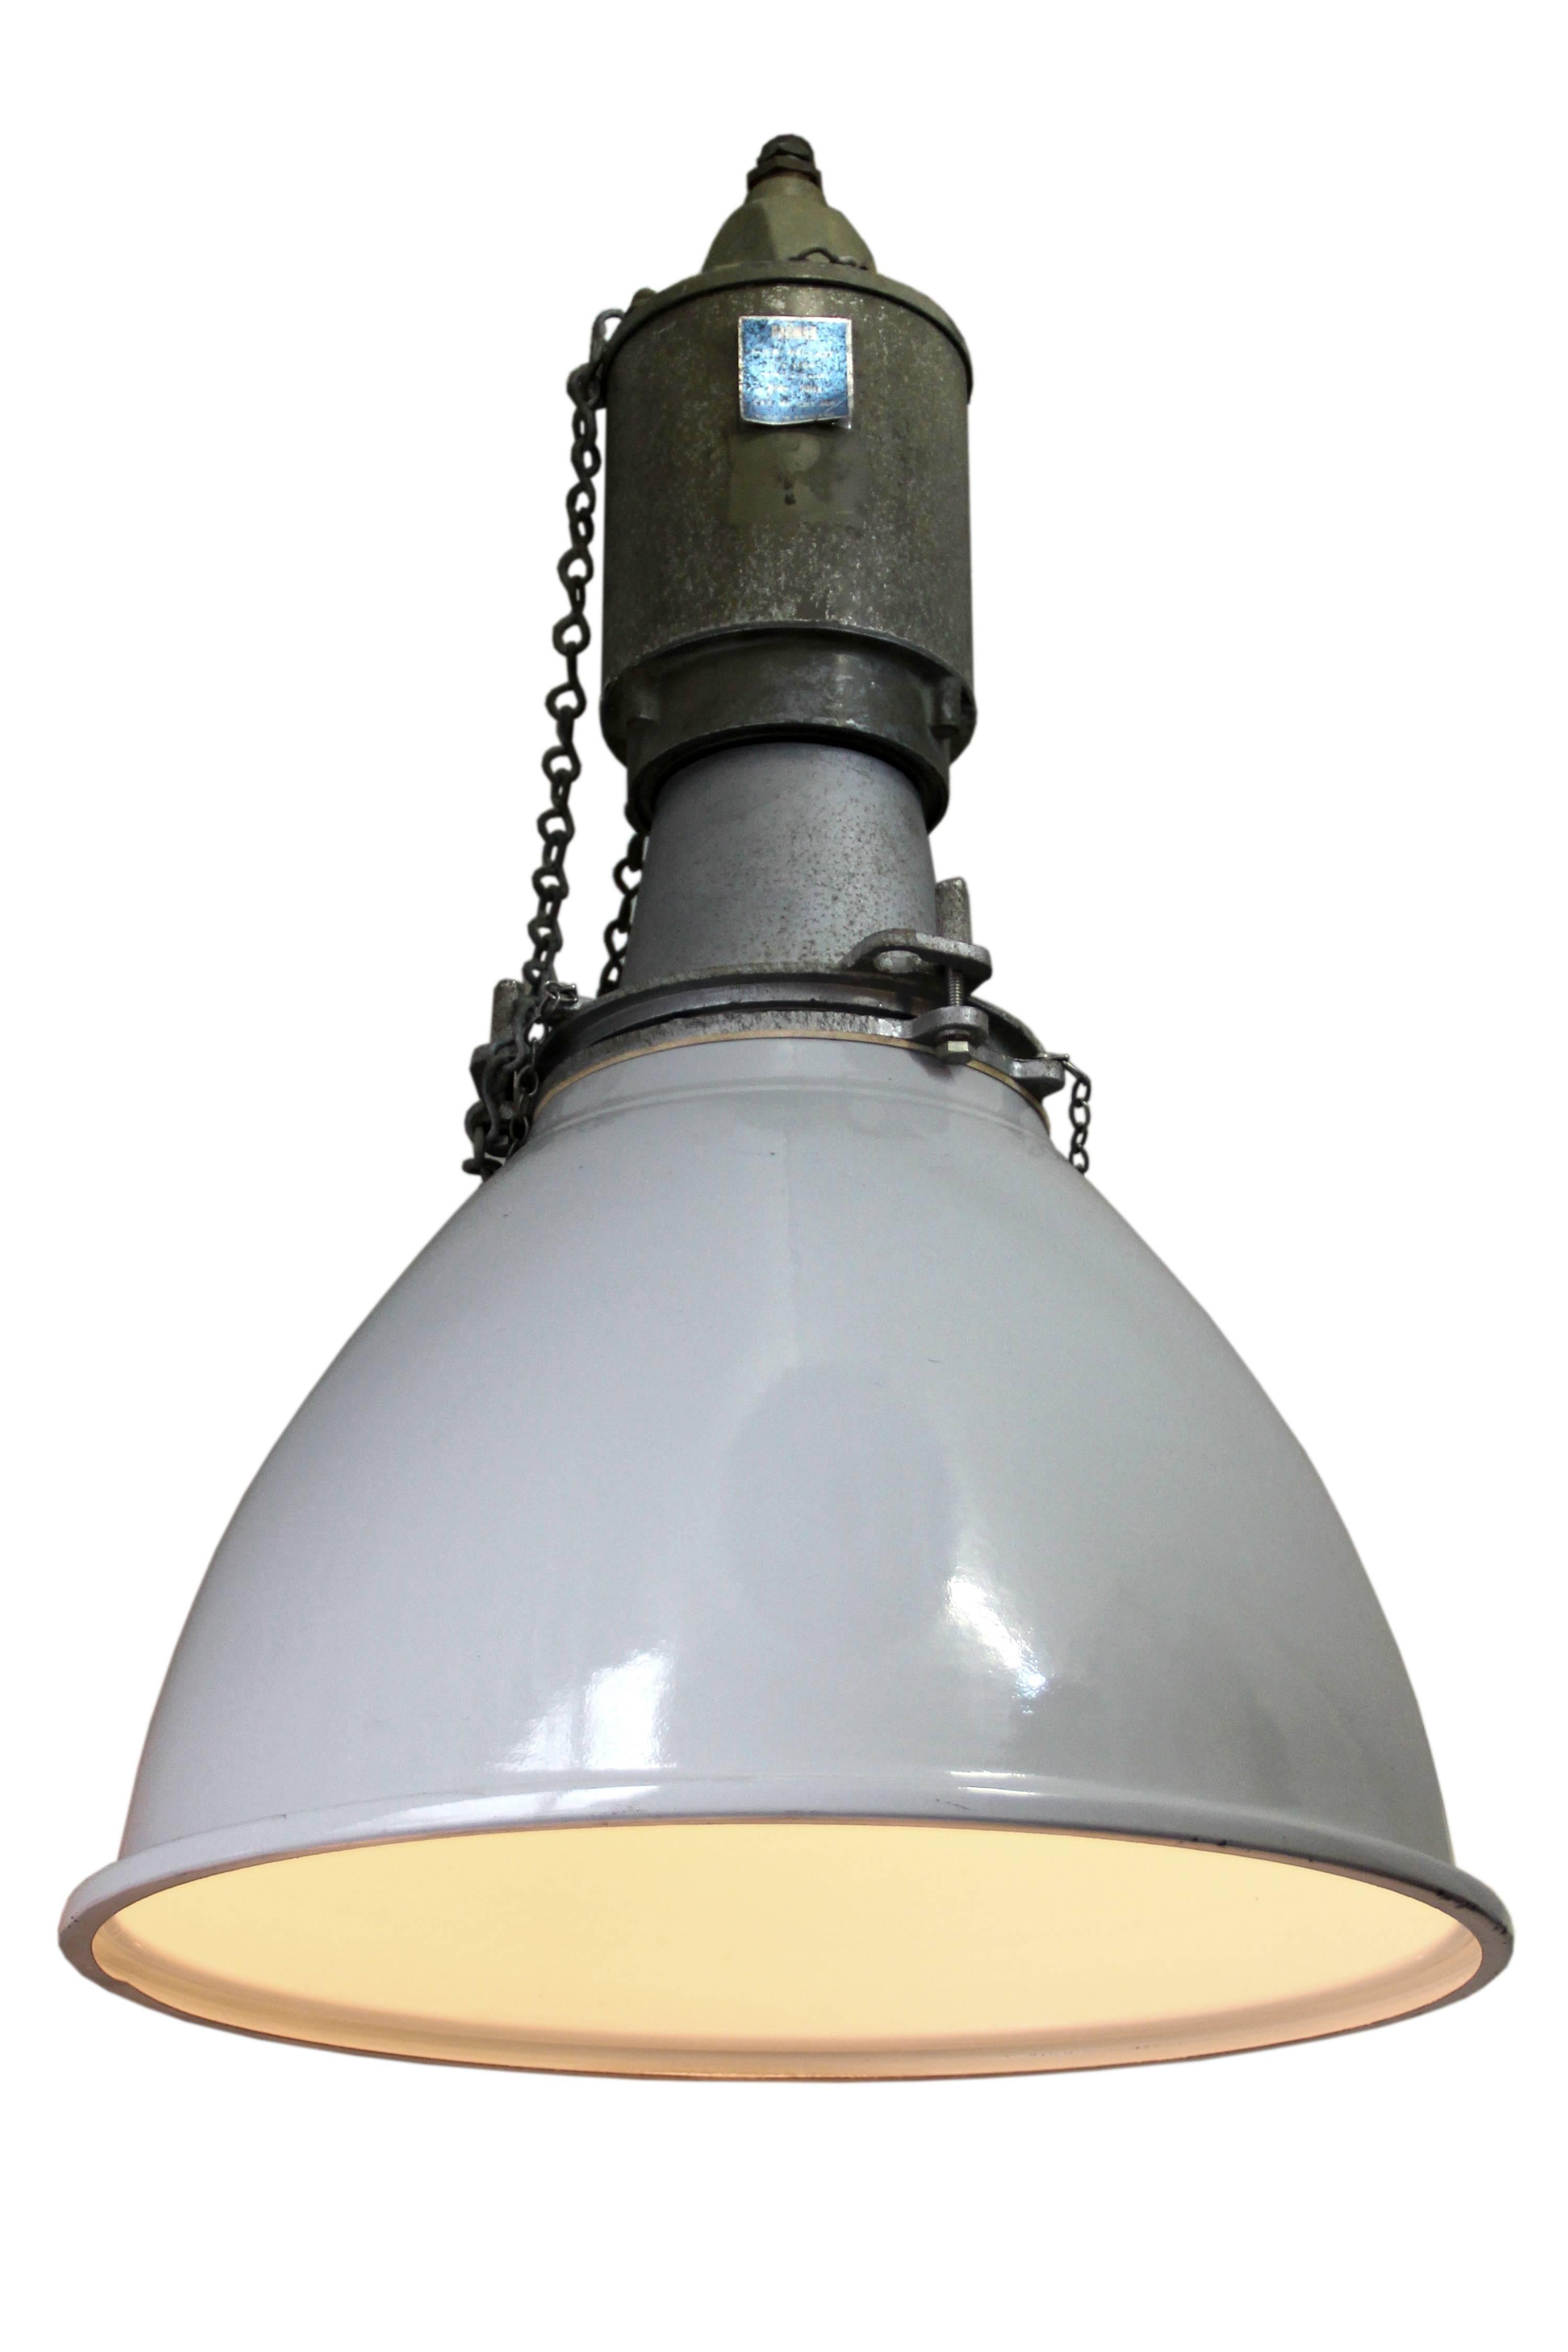 Classic British vintage Industrial lamp.
Grey enamel with white interior and cast aluminum top.

Weight: 5.0 kg / 11 lb

All lamps have been made suitable by international standards for incandescent light bulbs, energy-efficient and LED bulbs.